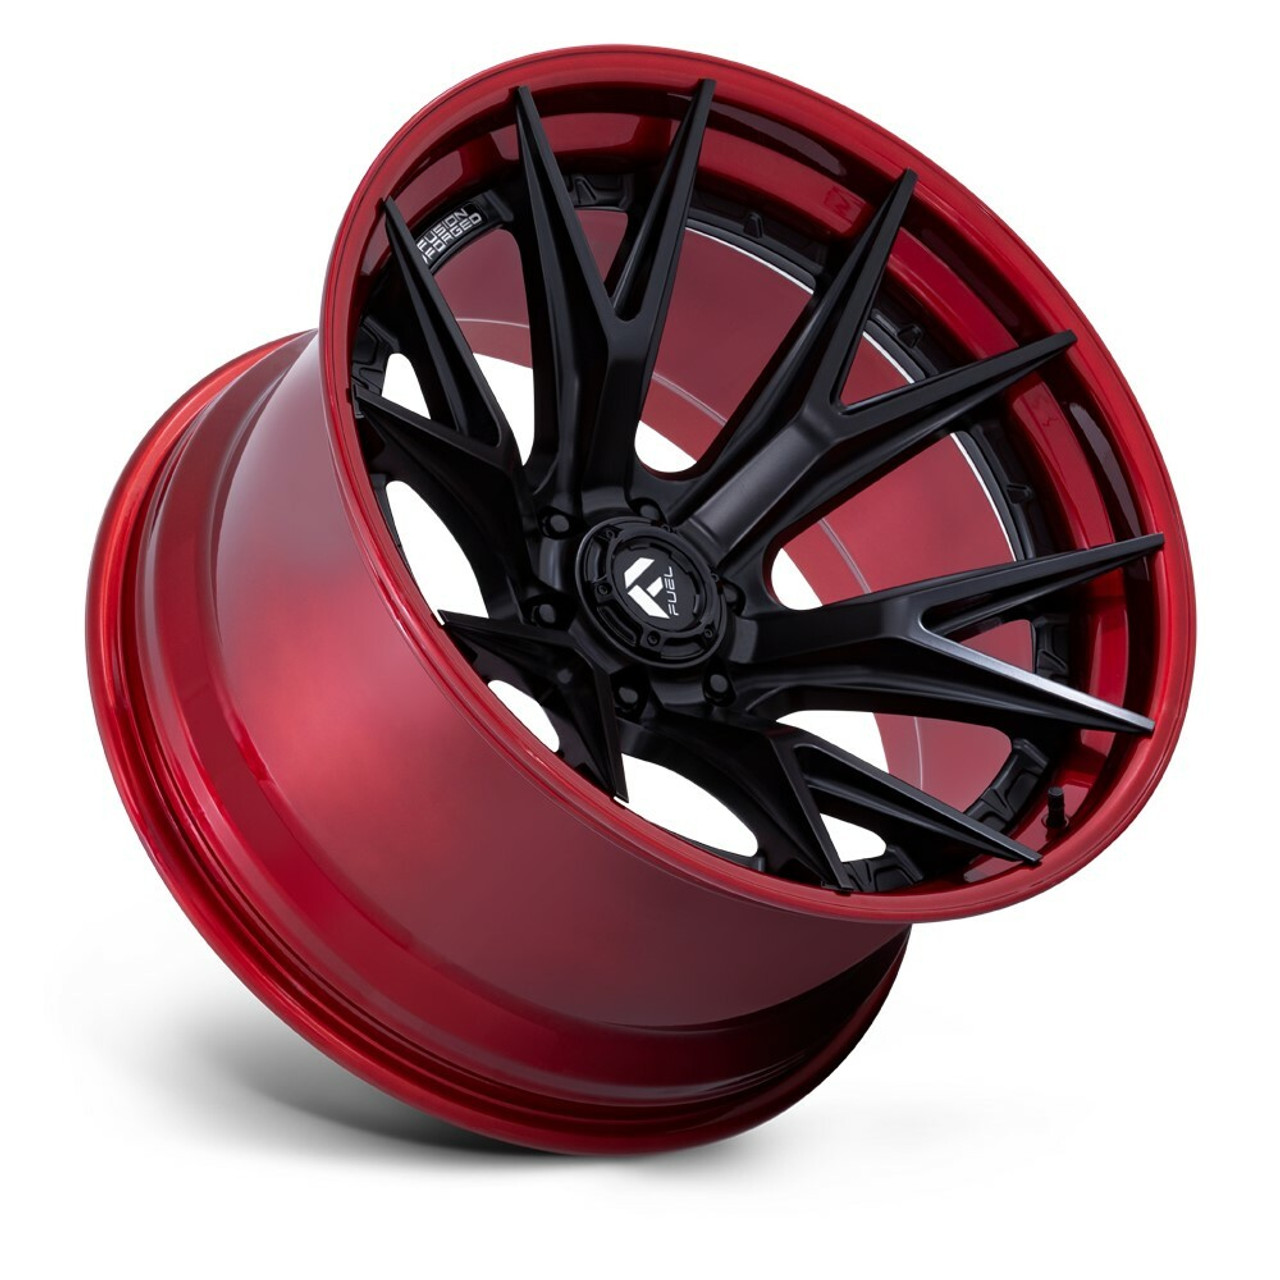 Fuel FC402 Catalyst 22x10 6x135 Matte Black Candy Red Lip 22" -18mm Lifted Wheel